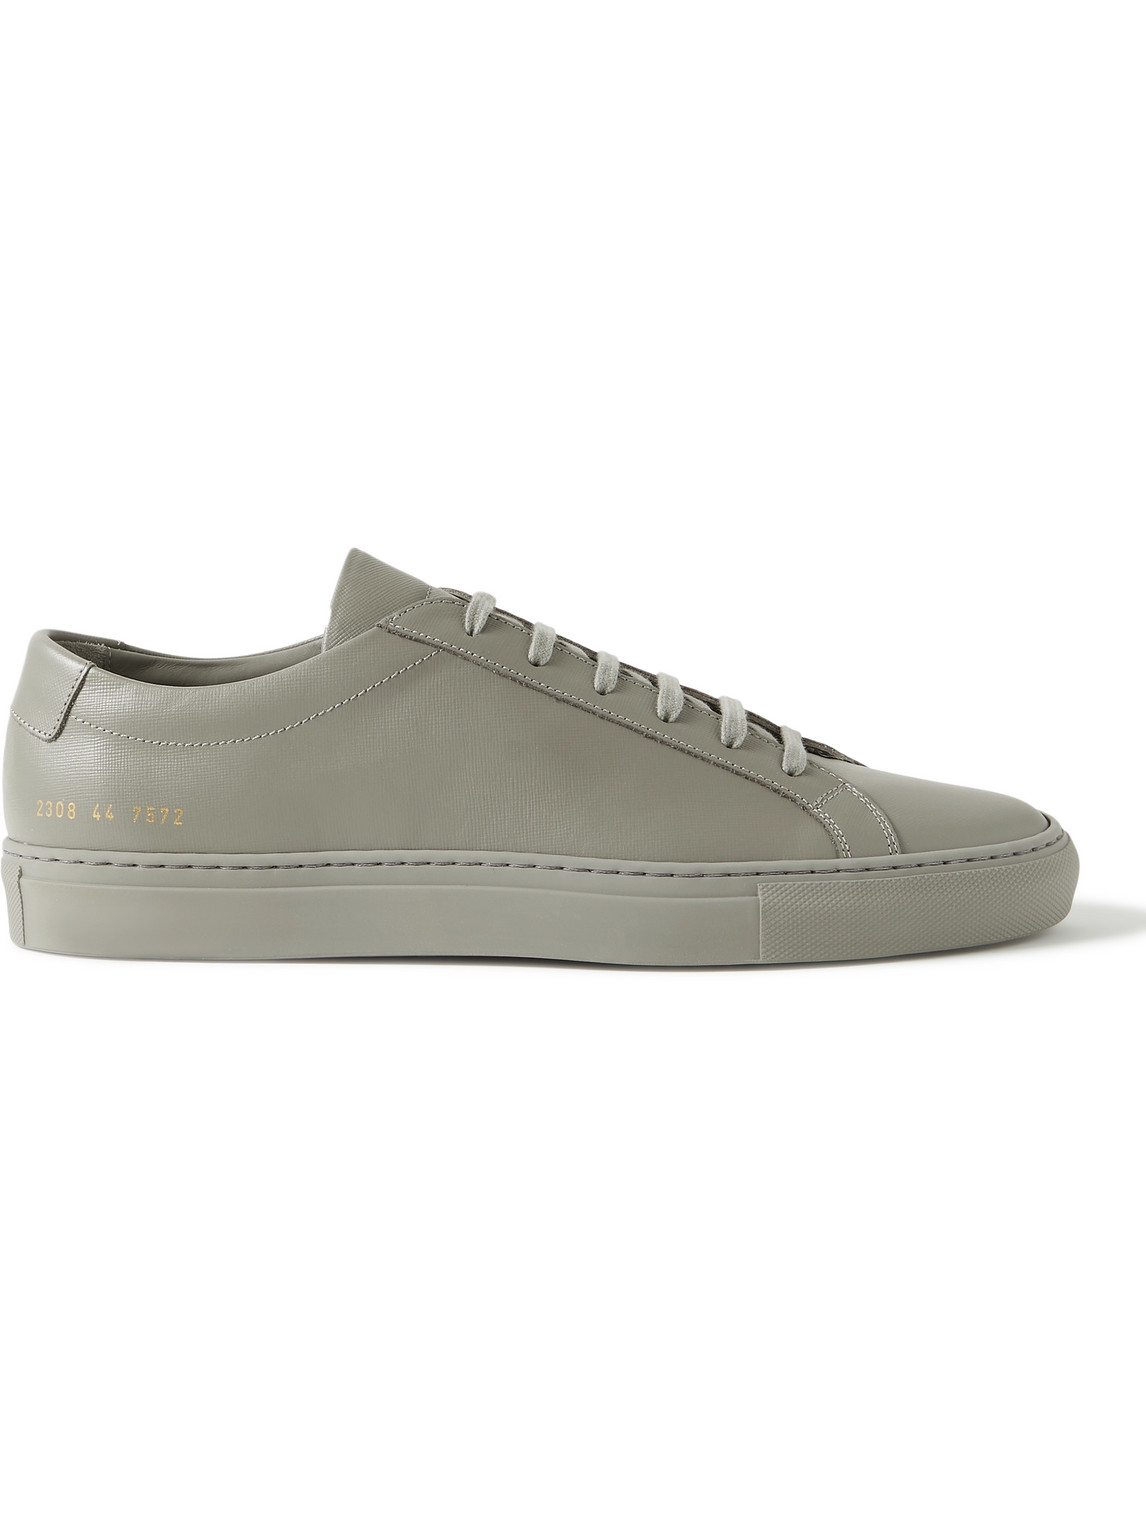 Common Projects Original Achilles Saffiano Leather Sneakers In Cobalt ...